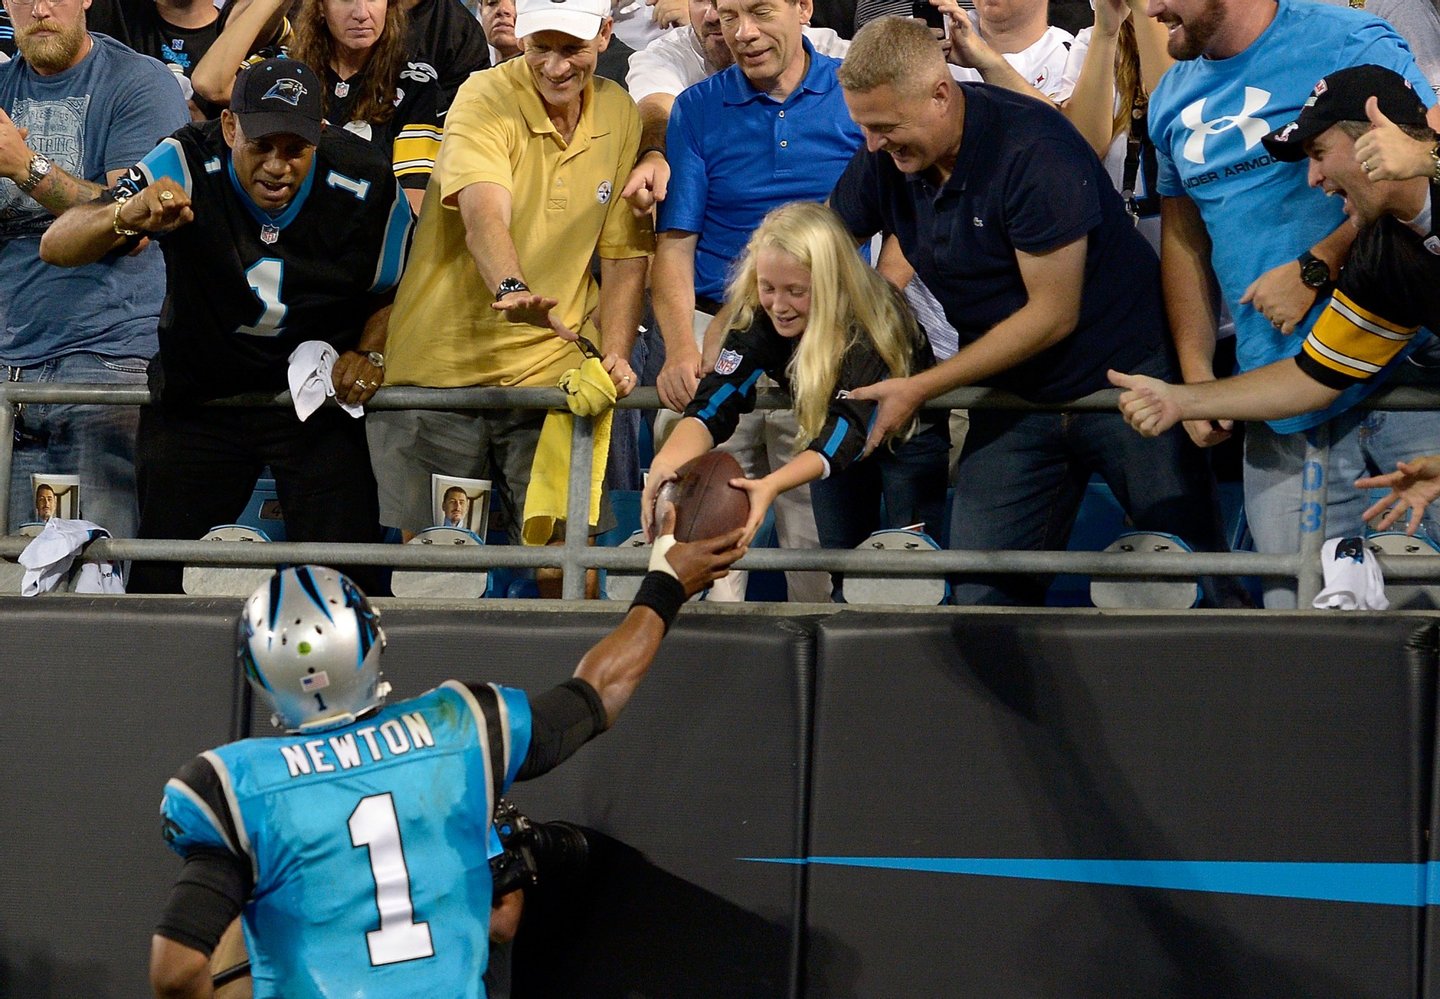 CHARLOTTE, NC - SEPTEMBER 21: Cam Newton #1 of the Carolina Panthers gives a fan a ball after a 3rd quarter touchdown against the Pittsburgh Steelers during their game at Bank of America Stadium on September 21, 2014 in Charlotte, North Carolina. (Photo by Grant Halverson/Getty Images)